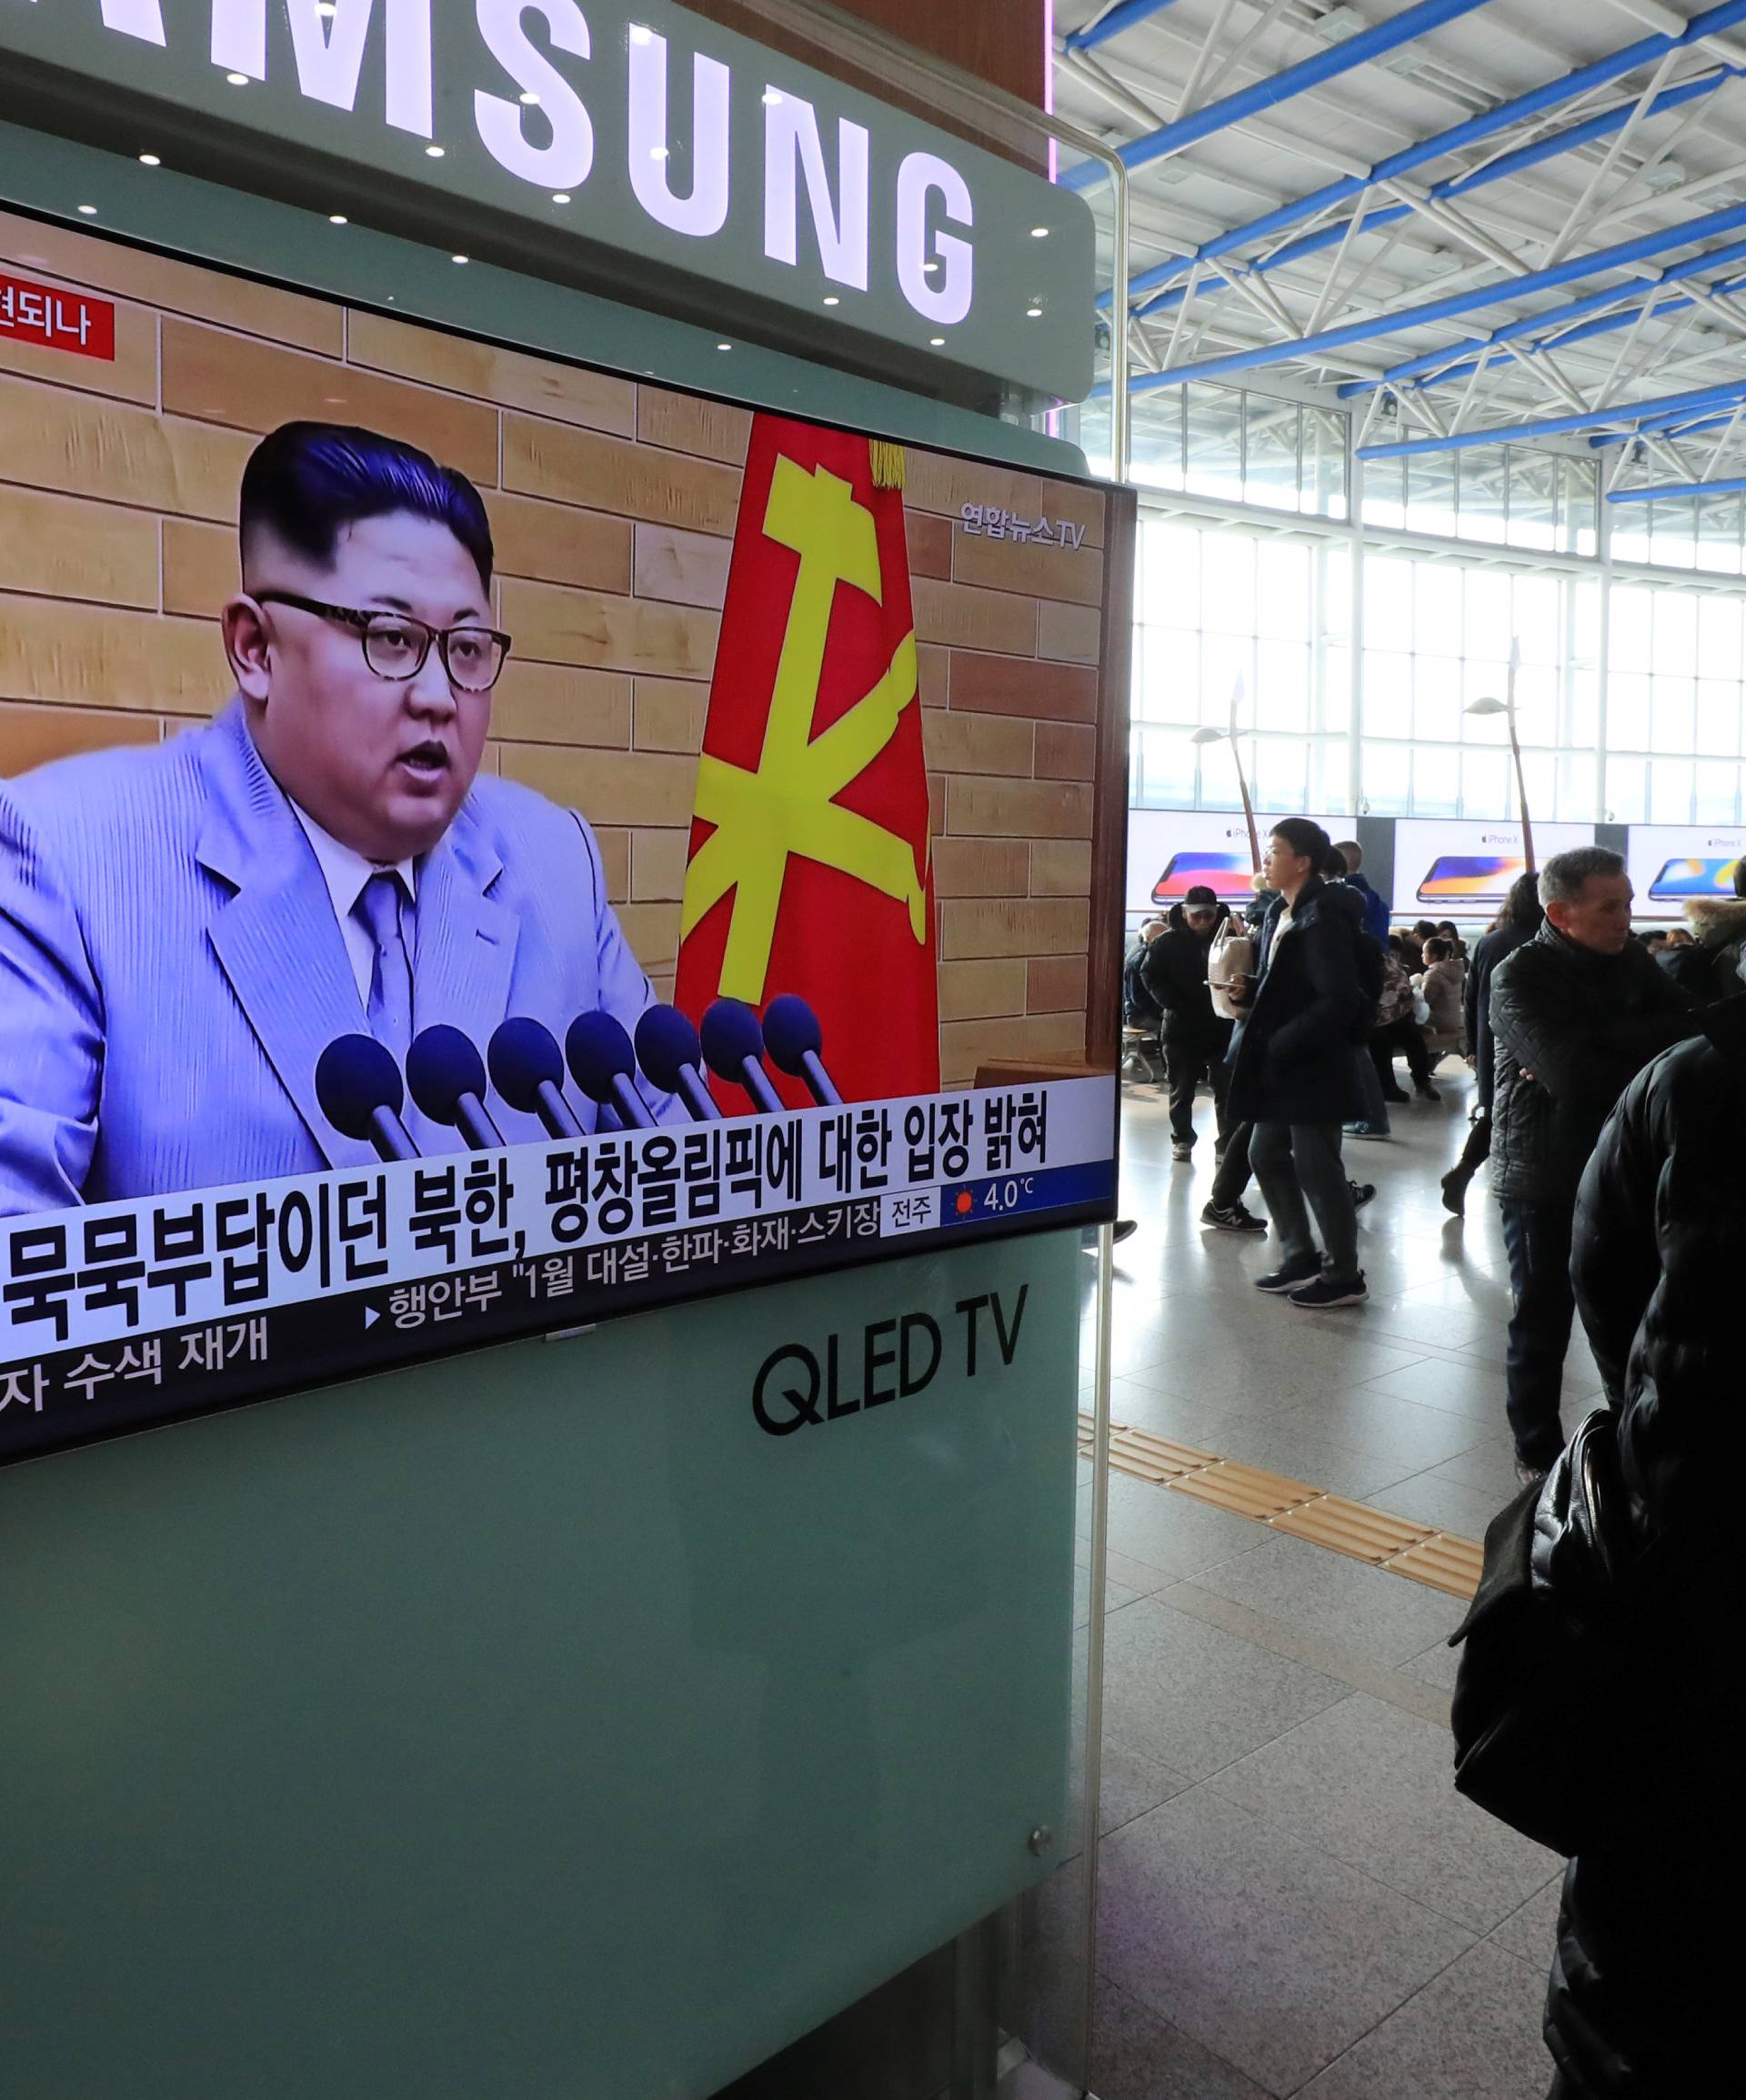 People watch a TV broadcasting a news report on North Korea's leader Kim Jong Un speaking during a New Year's Day speech, in Seoul